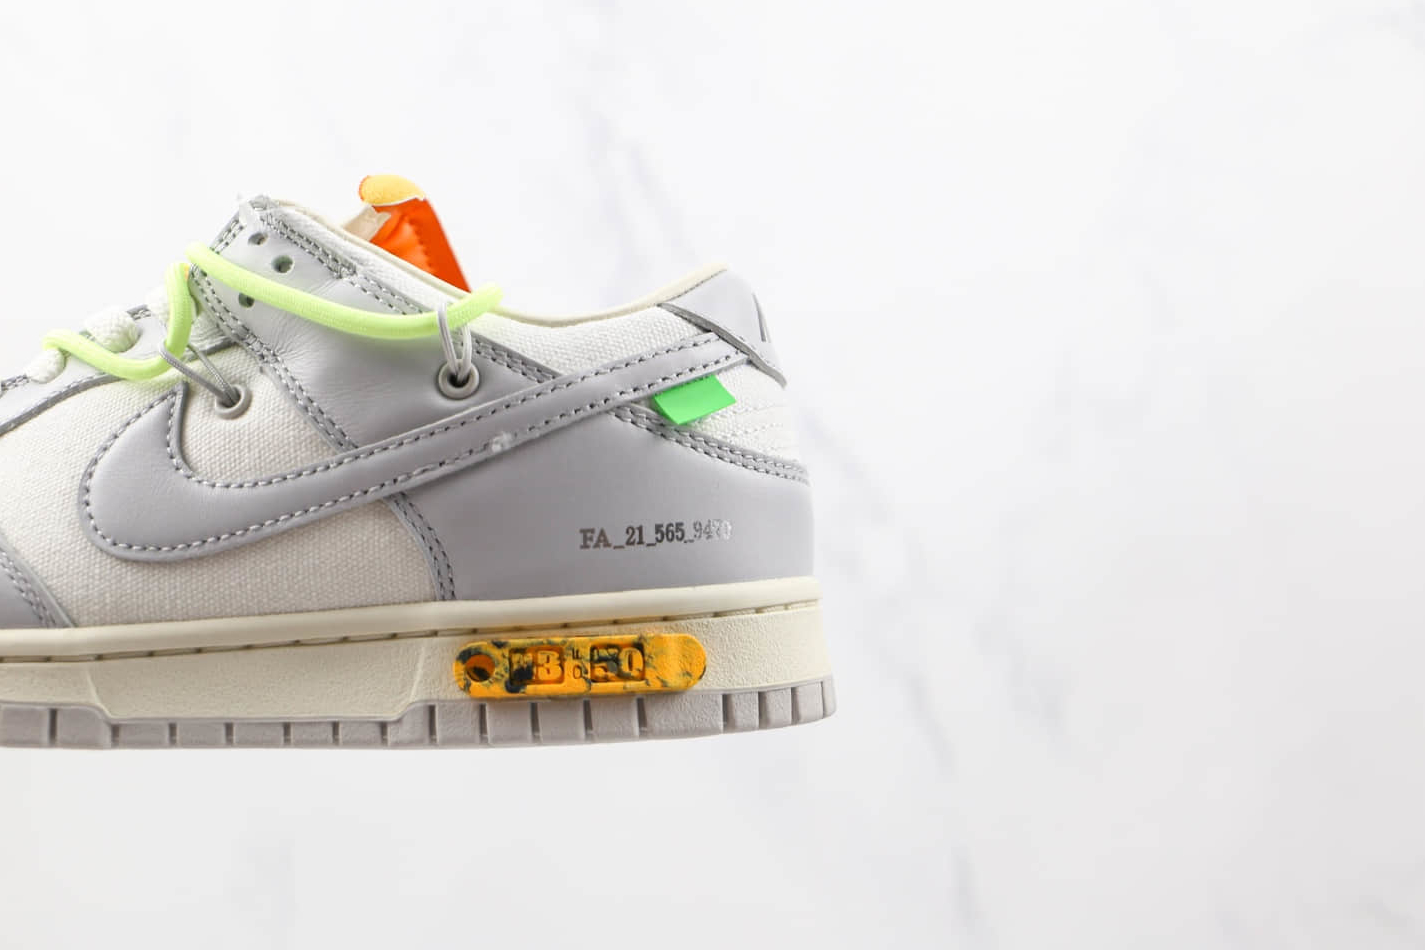 Nike Off-White x Dunk Low 'Lot 43 of 50' DM1602-128 - Limited Edition Collaboration Sneaker